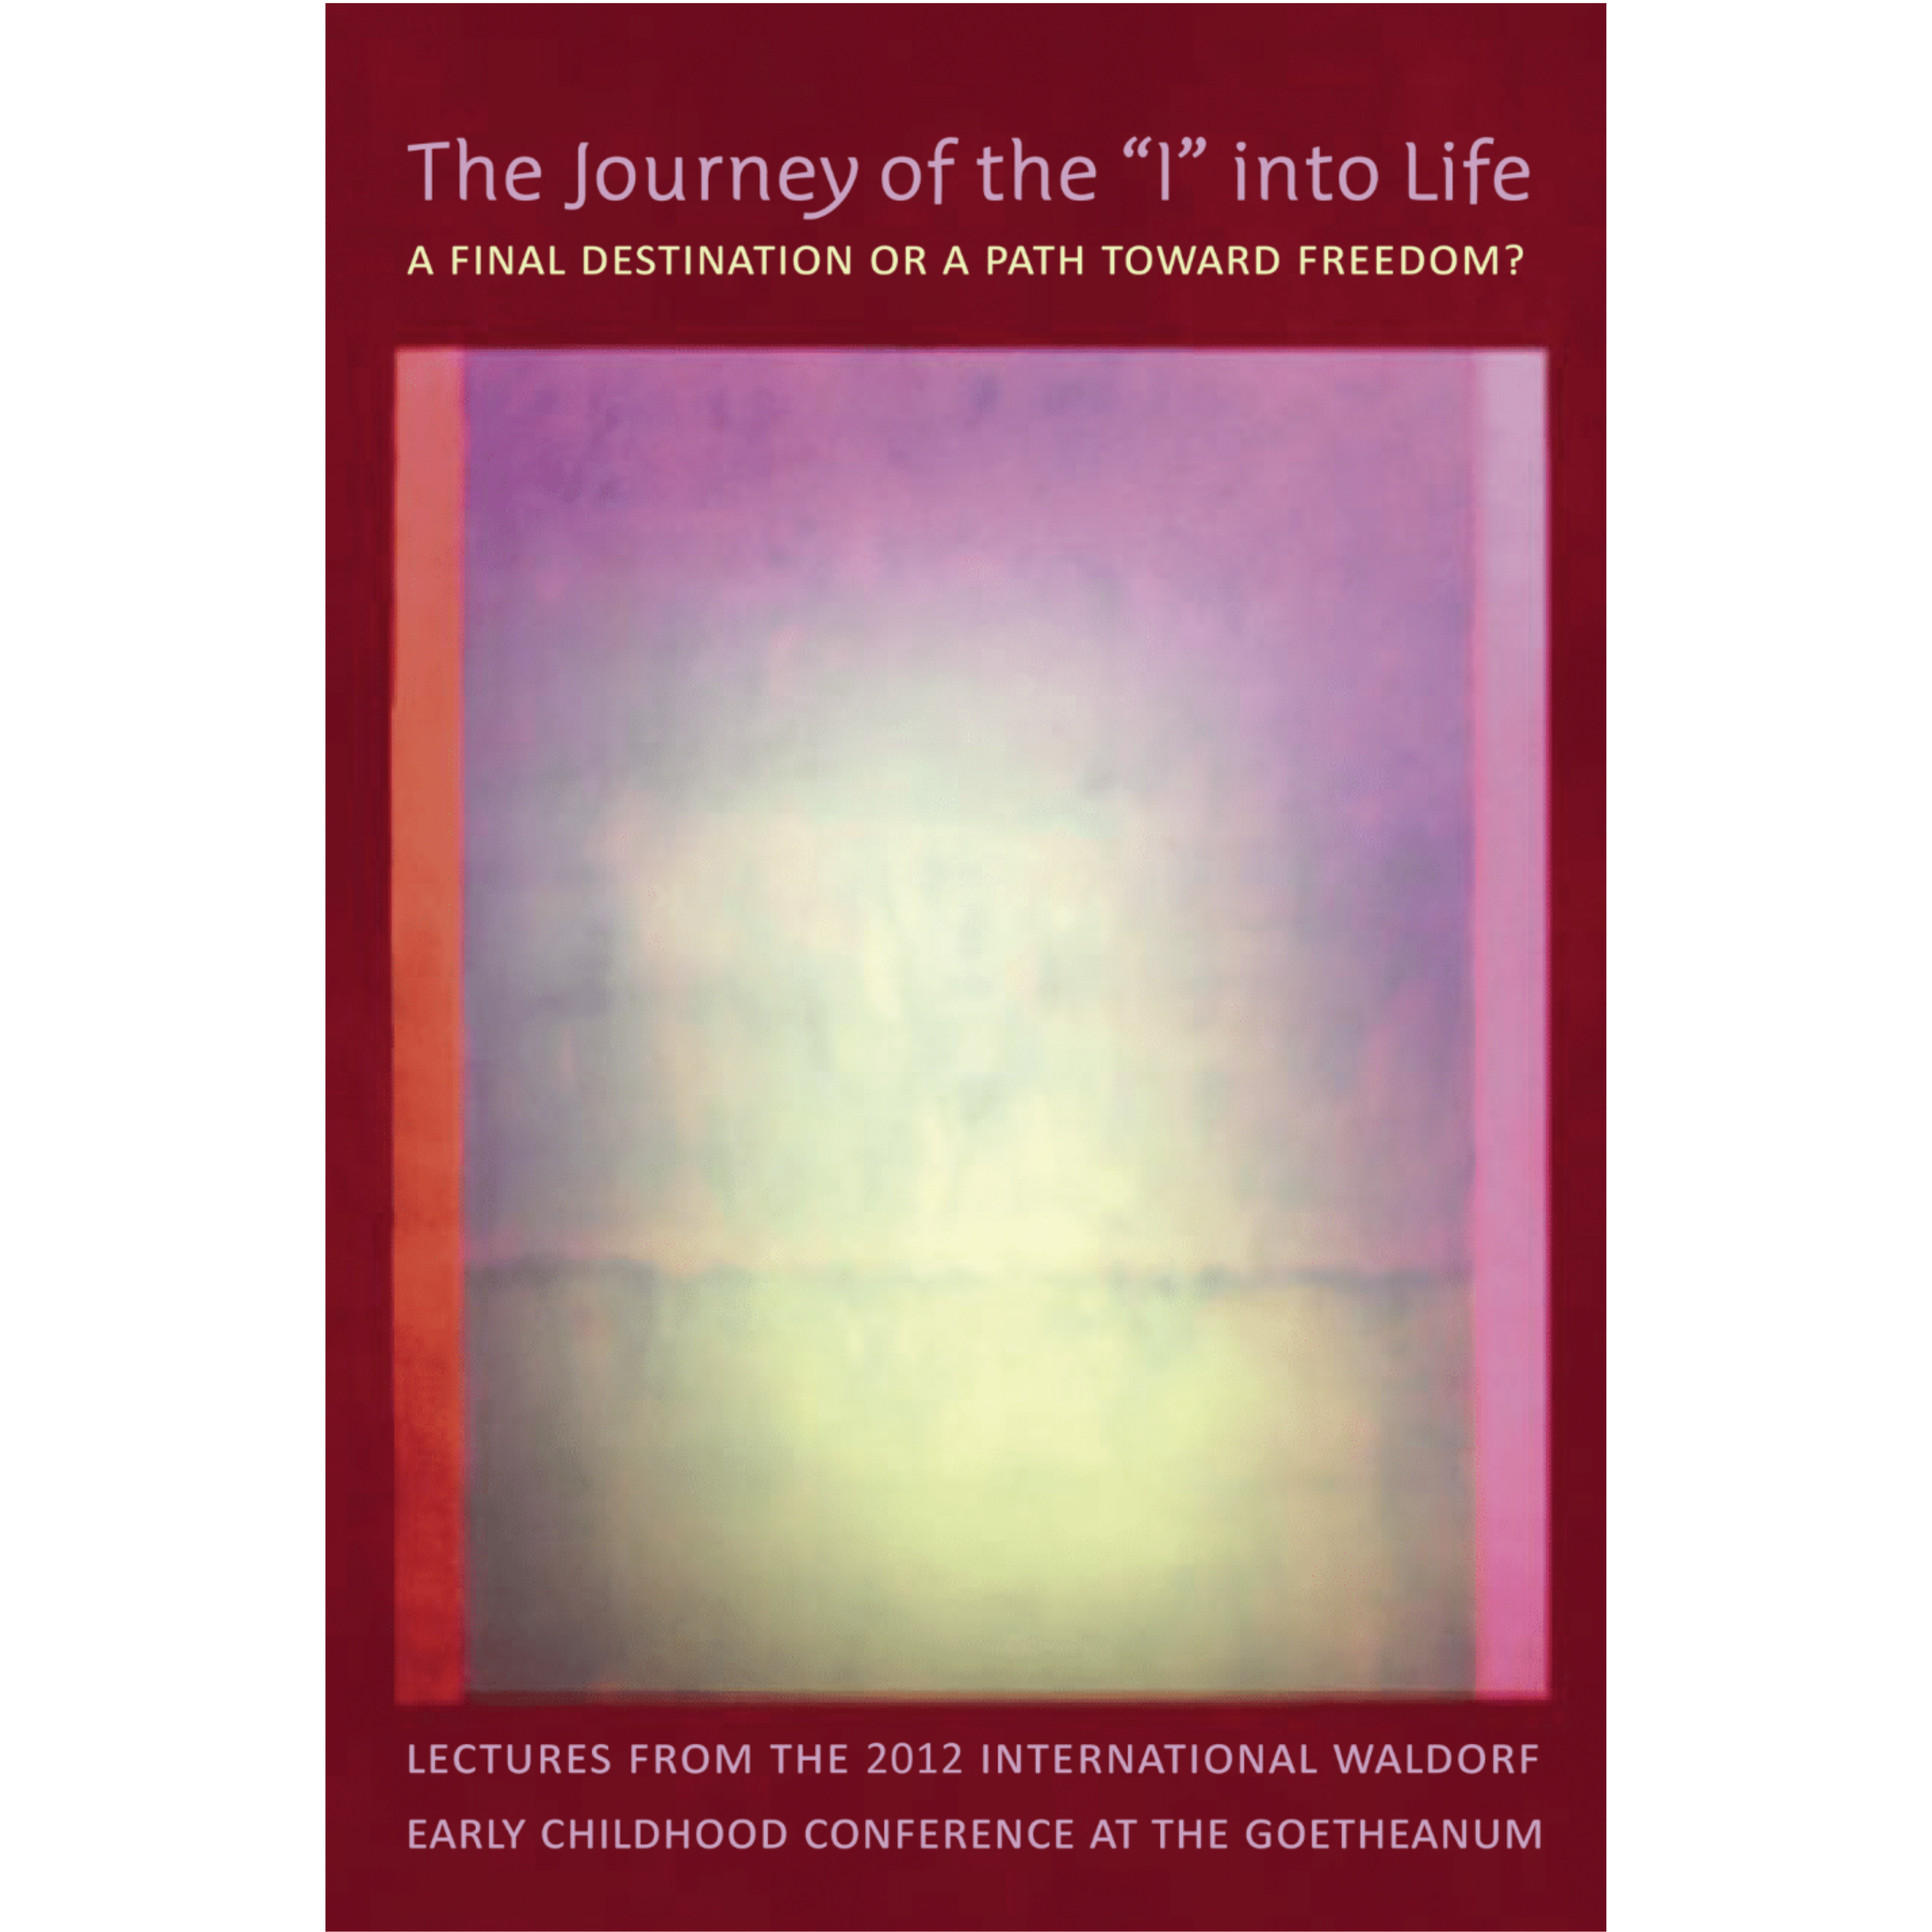 The Journey of the "I" into Life